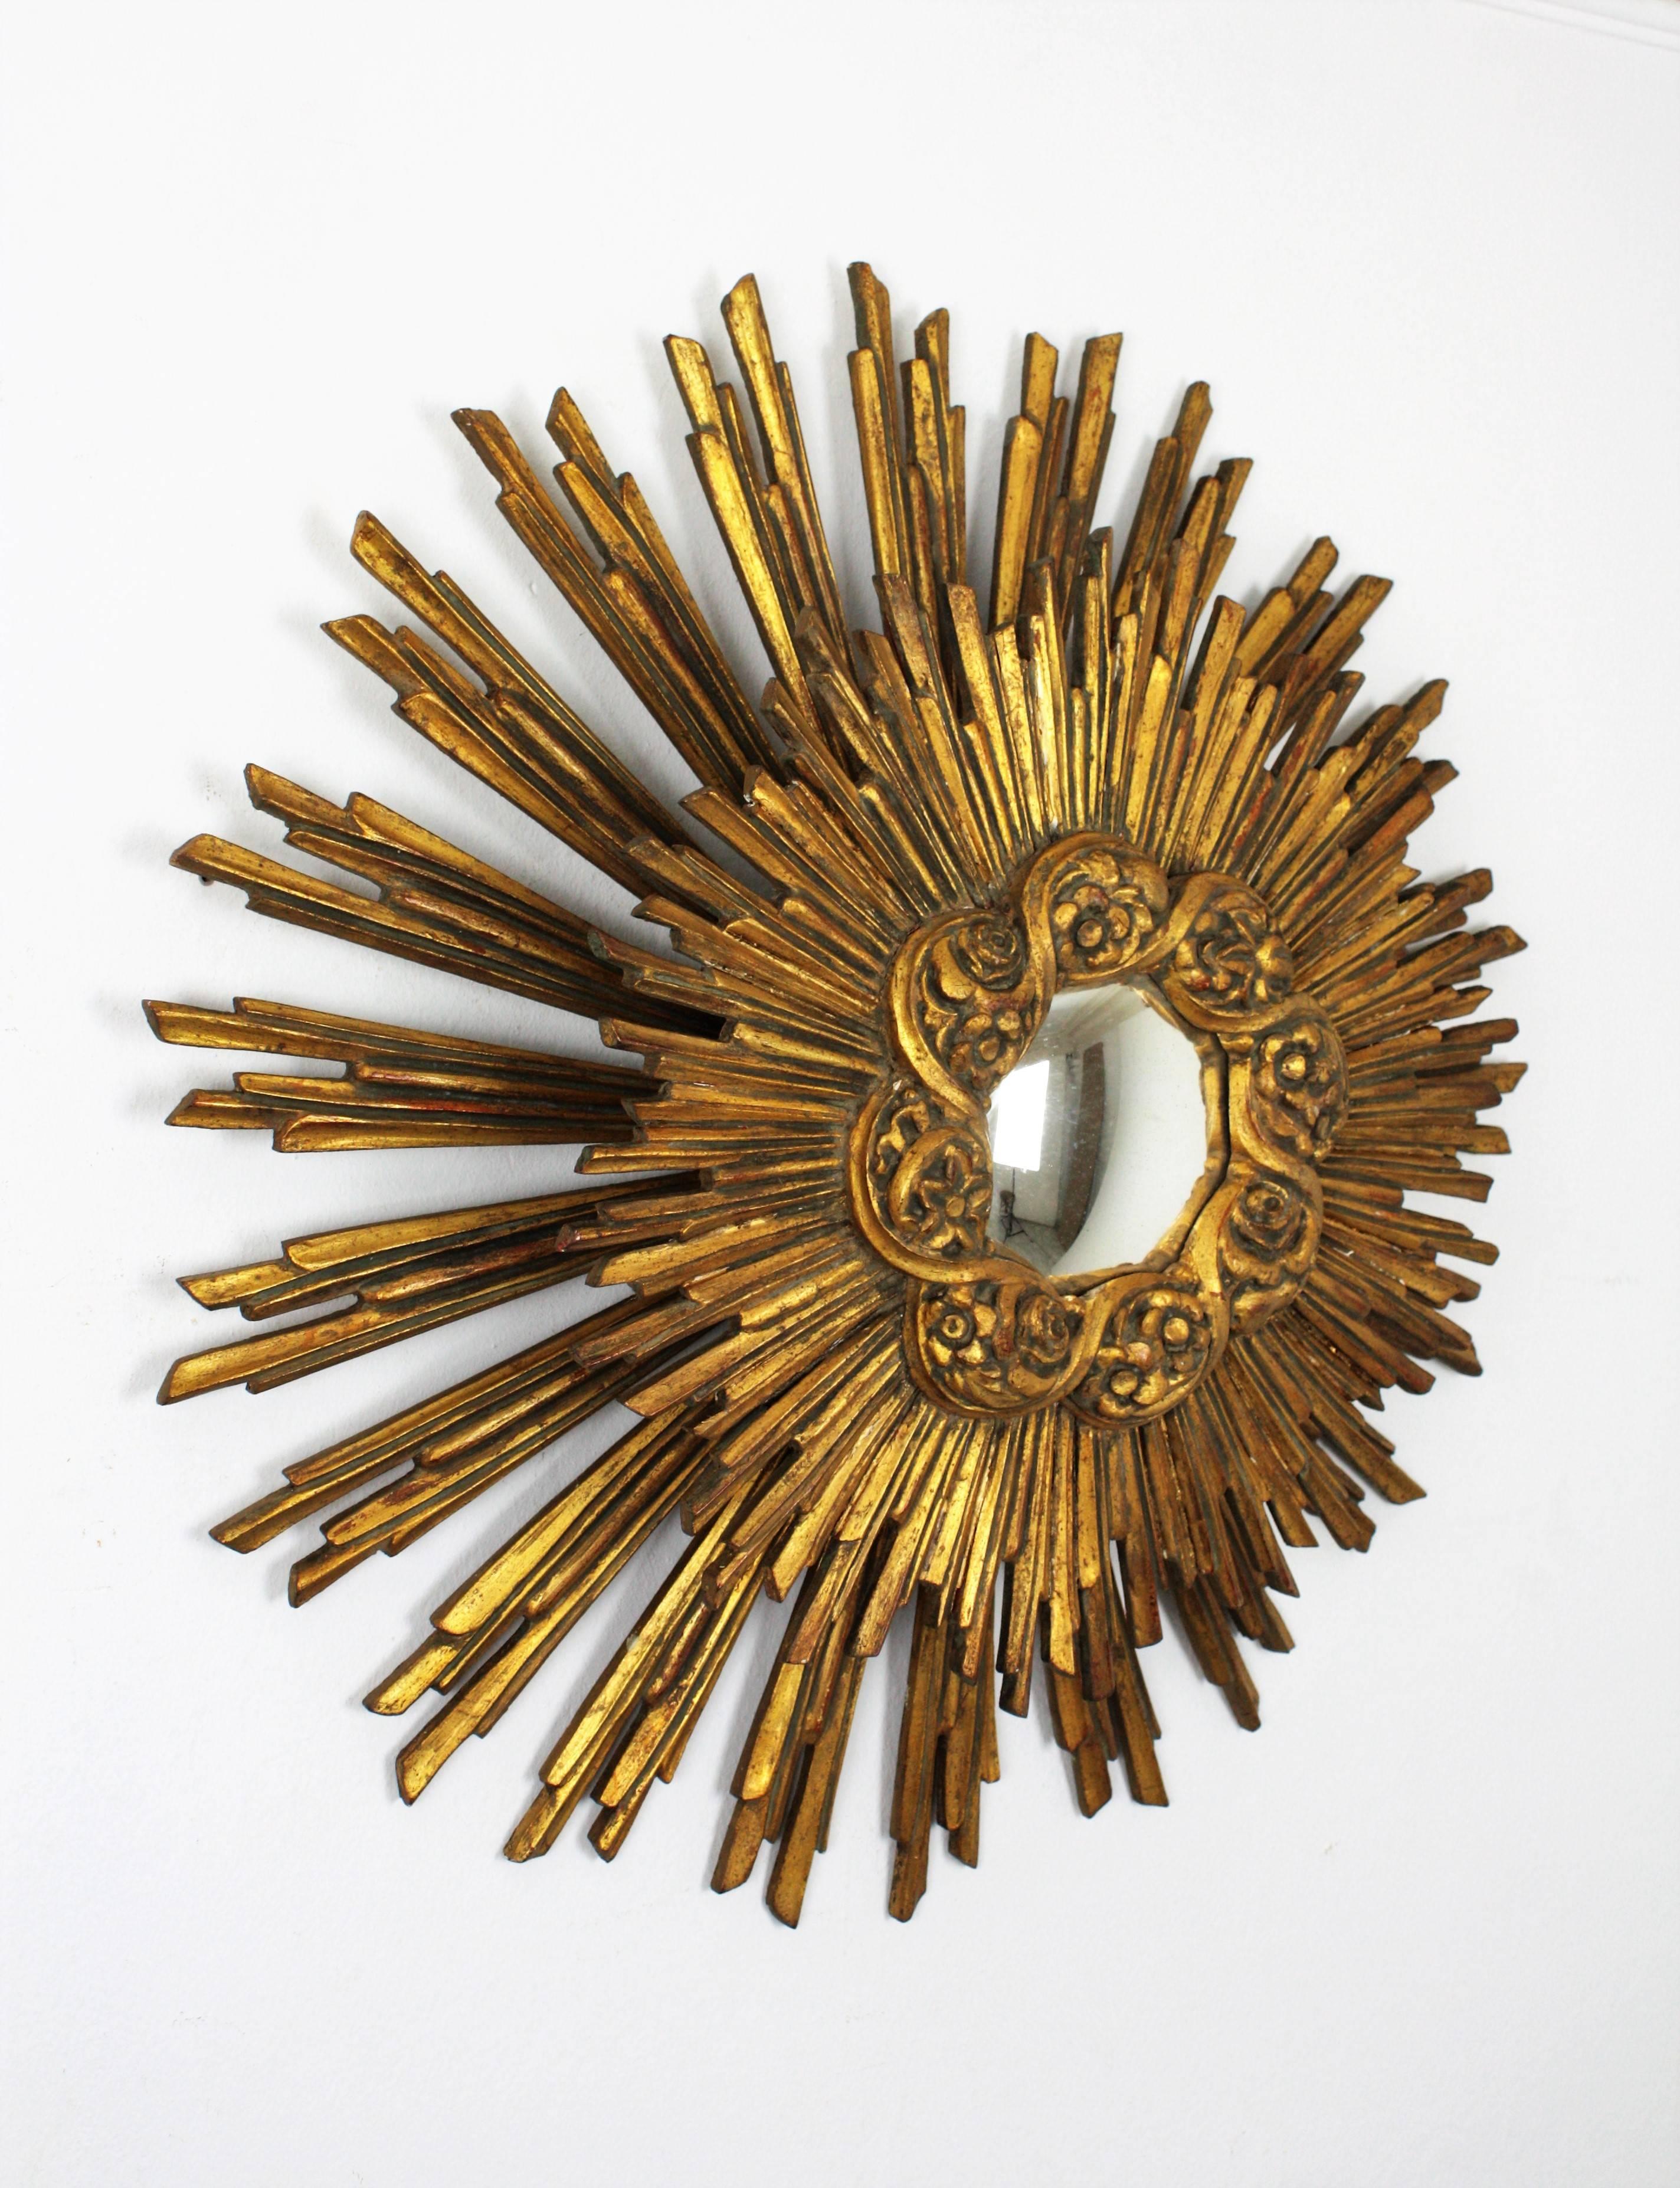 A mangiest double layered wood carved sunburst mirror with gold leaf finish and convex glass that it is also a wall light sconce or a ceiling light fixture.
This piece is gorgeous due to its size and the interesting light effect when lit.
The